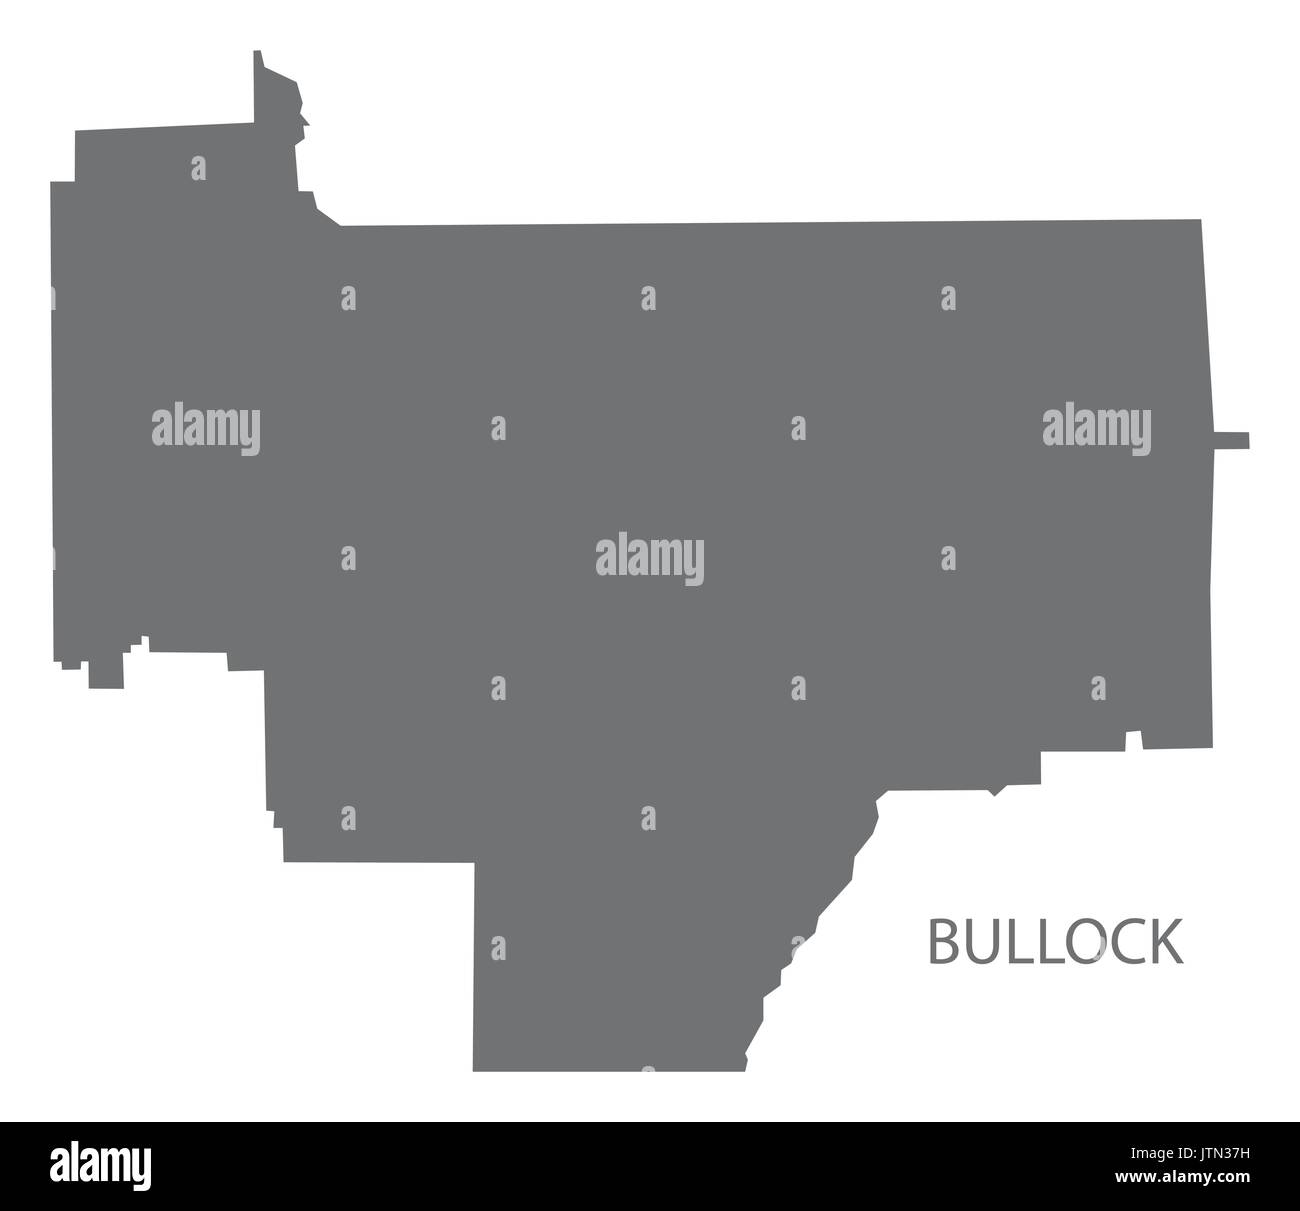 Bullock County Map Of Alabama Usa Grey Illustration Silhouette Stock Vector Image And Art Alamy 0737